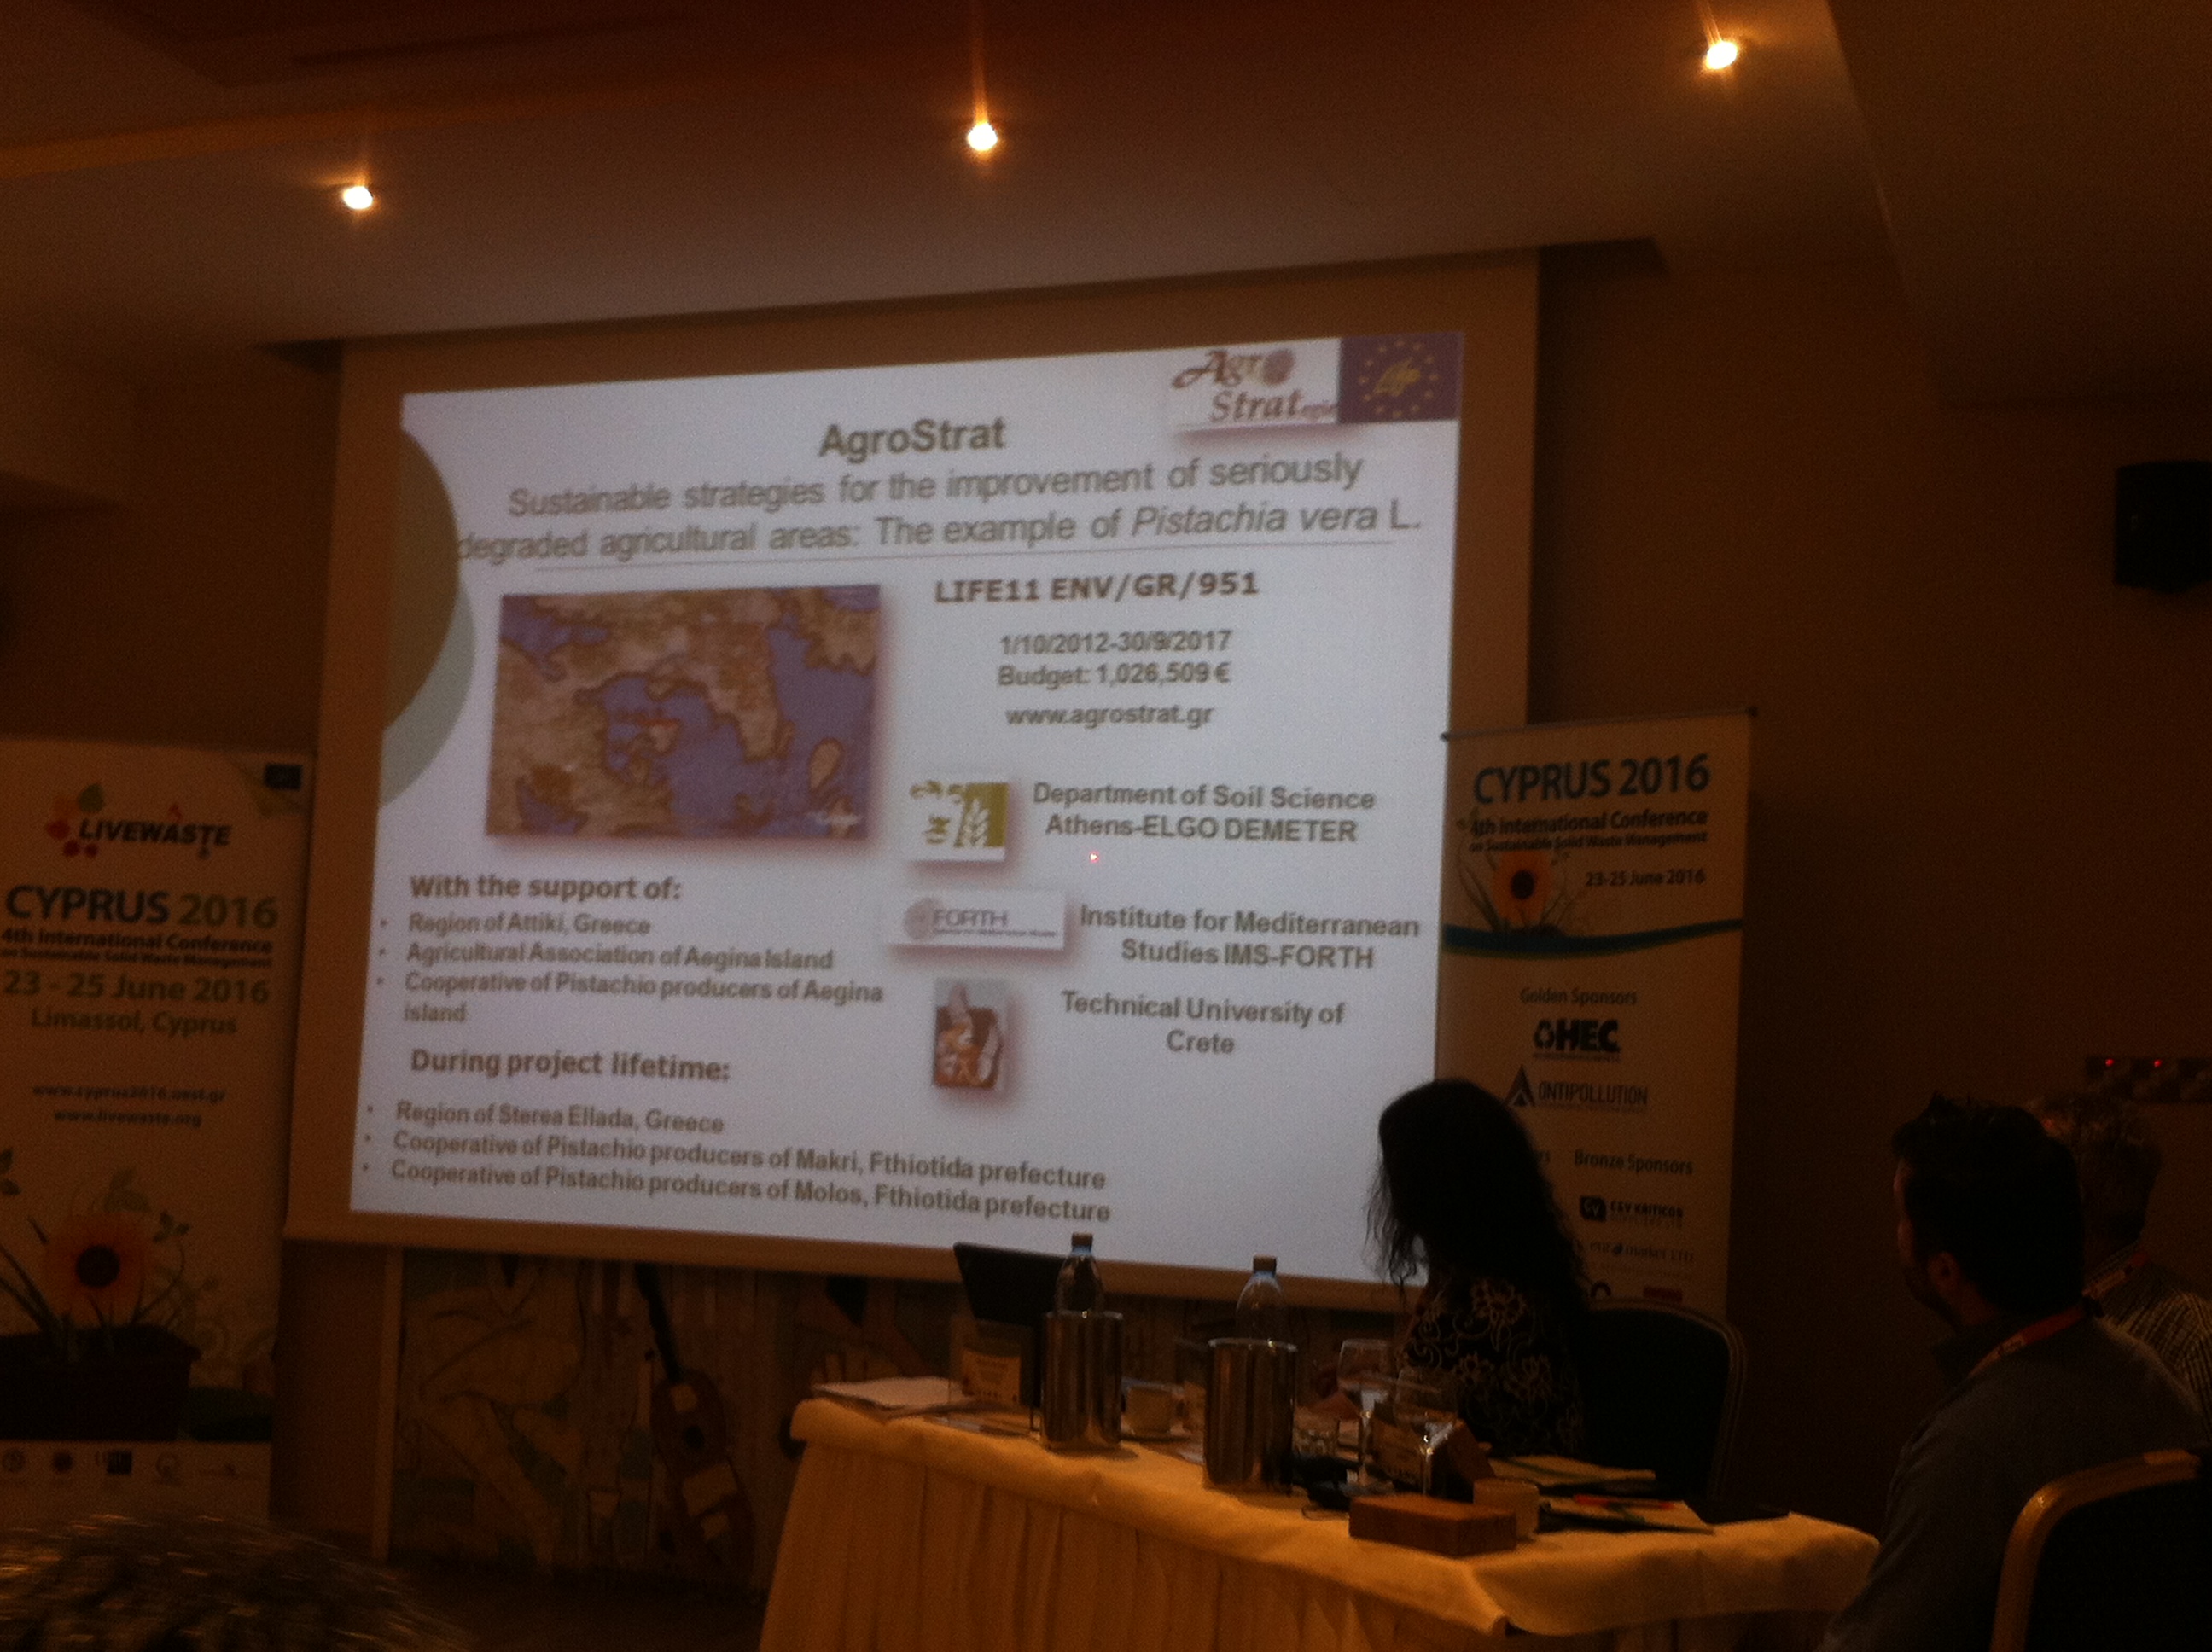 Agrostart partiales in Cyprus 2016 Conference